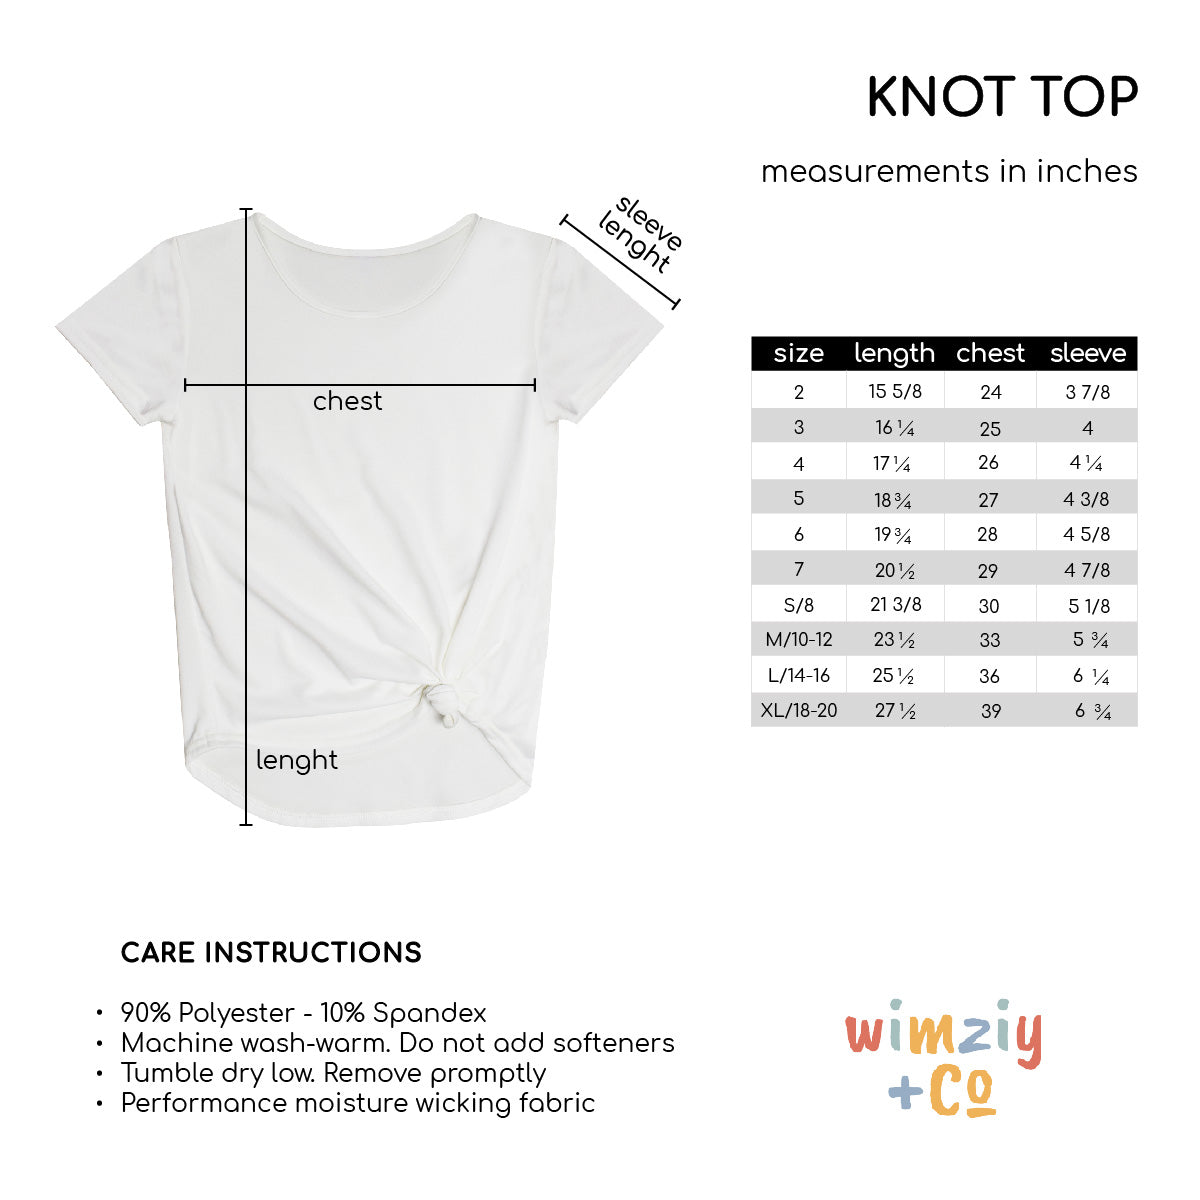 Slow Down Royal Knot Top - Wimziy&Co.